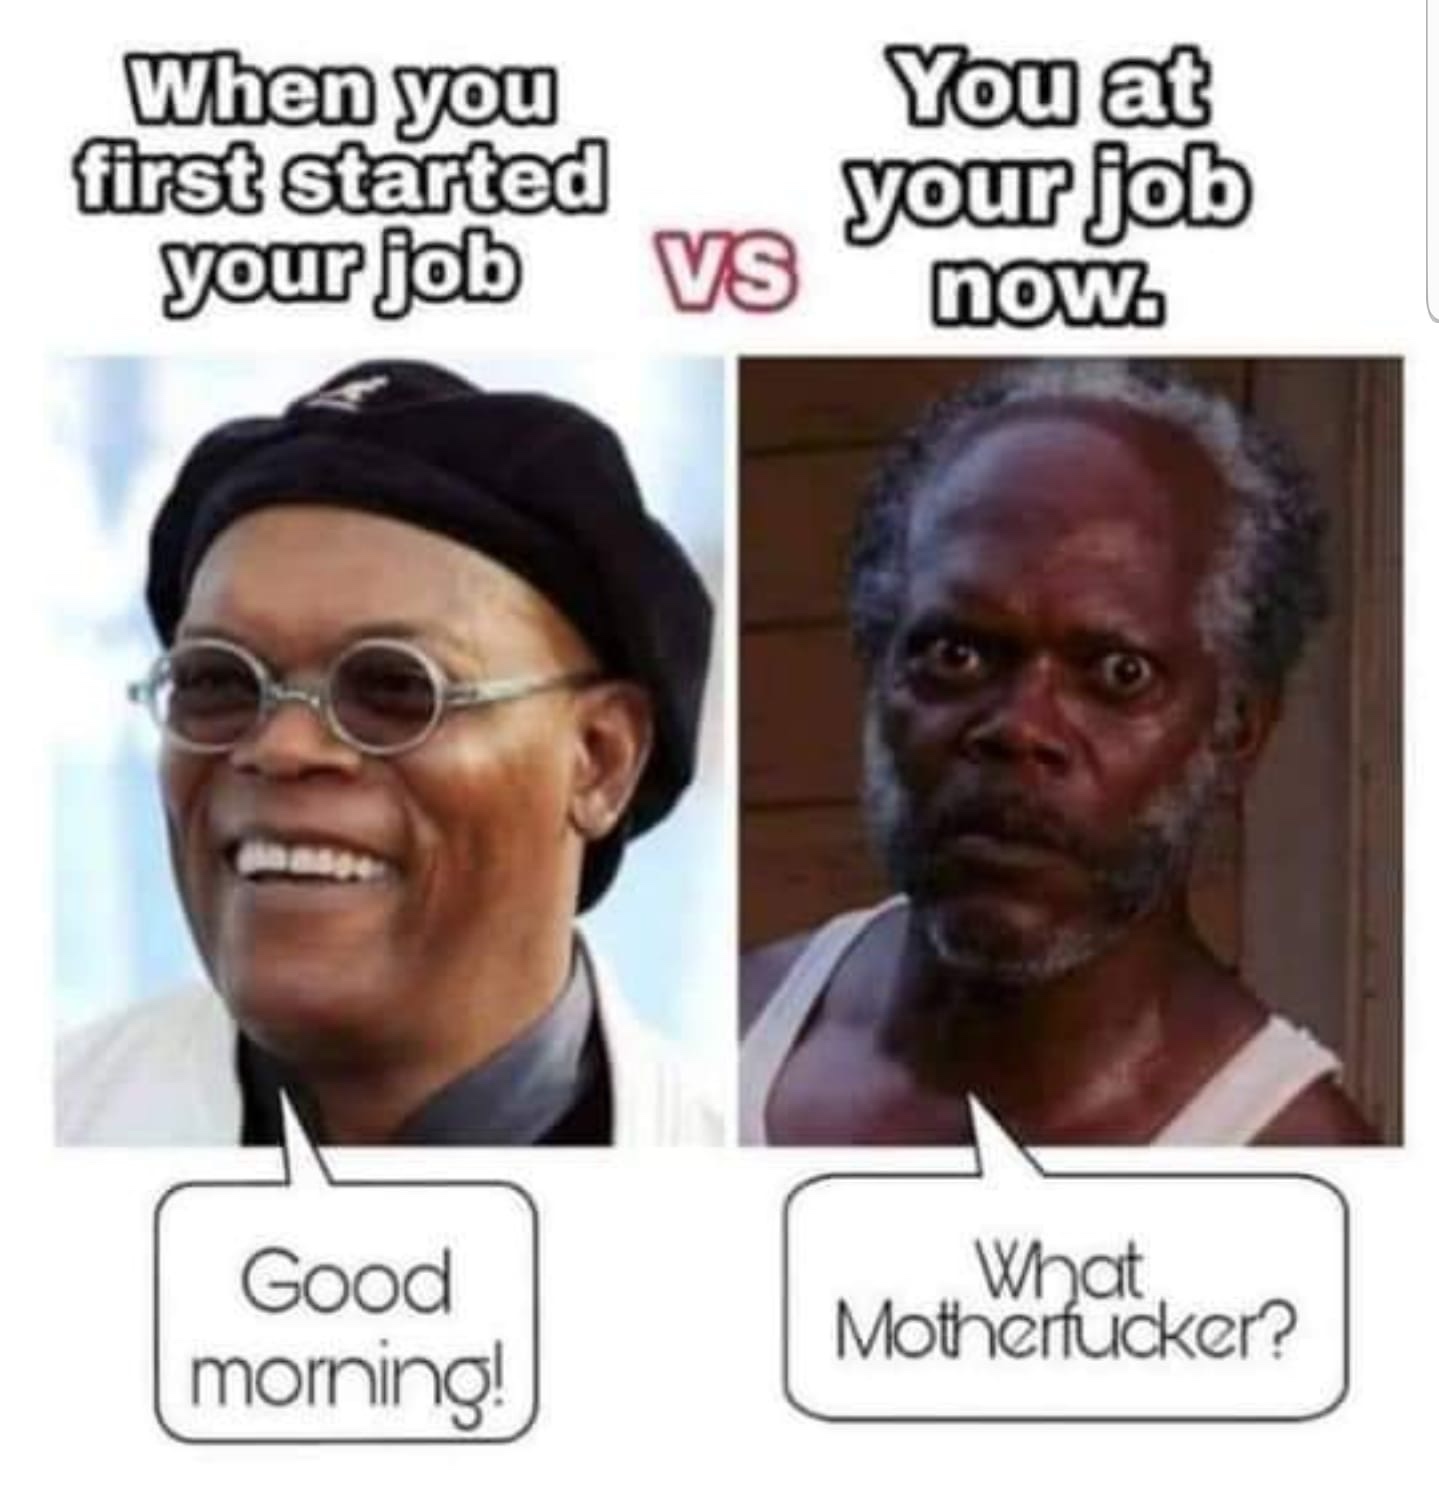 samuel l jackson what motherfucker meme - When you first started your job You at your job now. Vs Good morning! What Motherfucker?